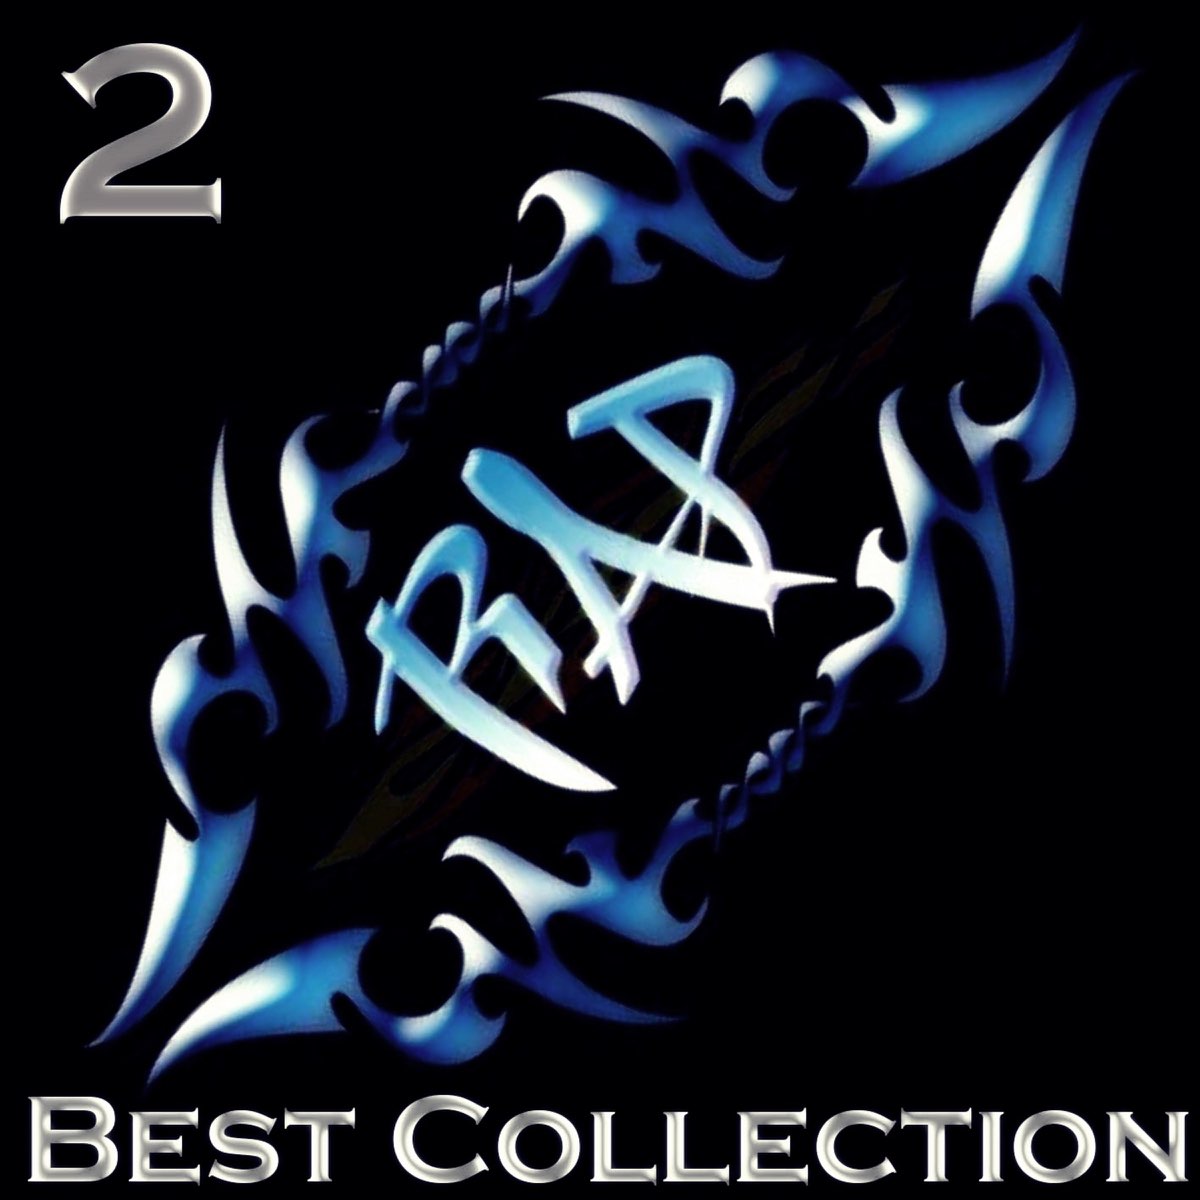 Best collection 2